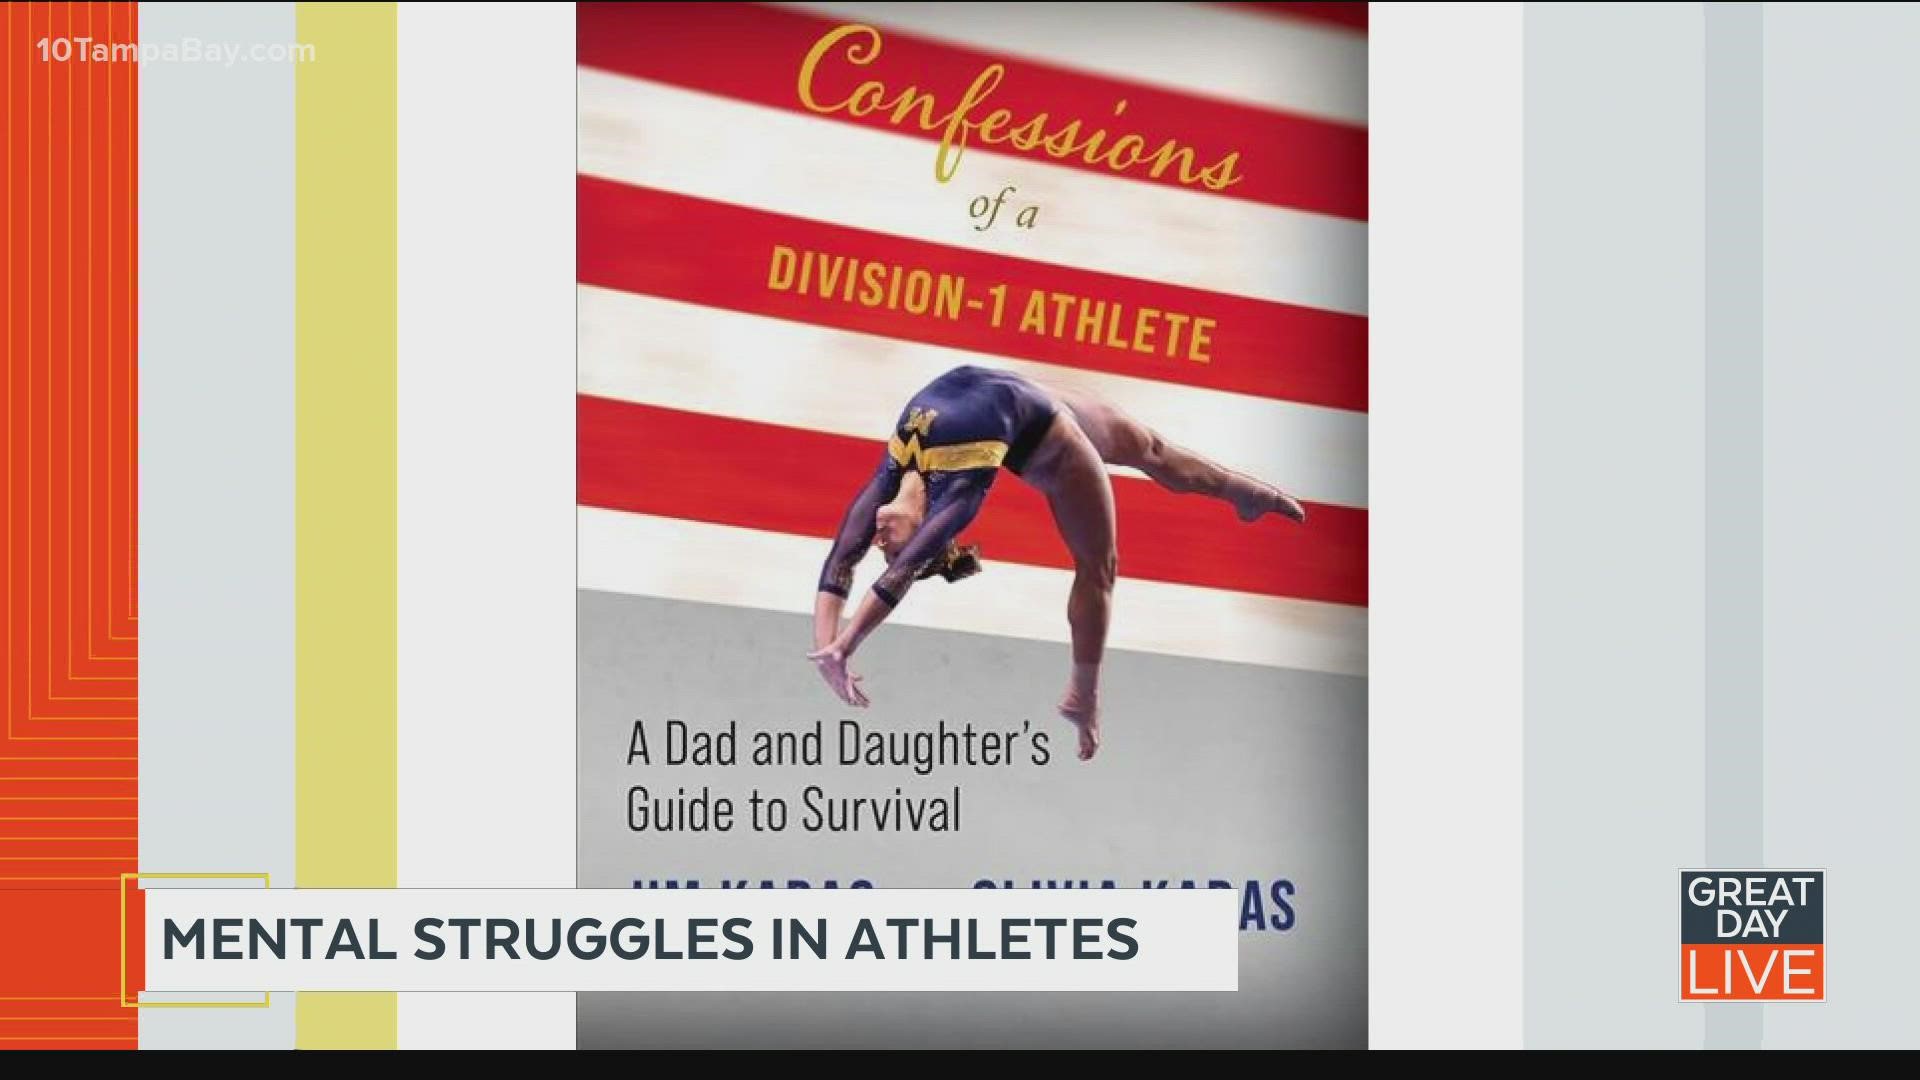 Father/daughter team explain mental health struggles of young athletes in new book